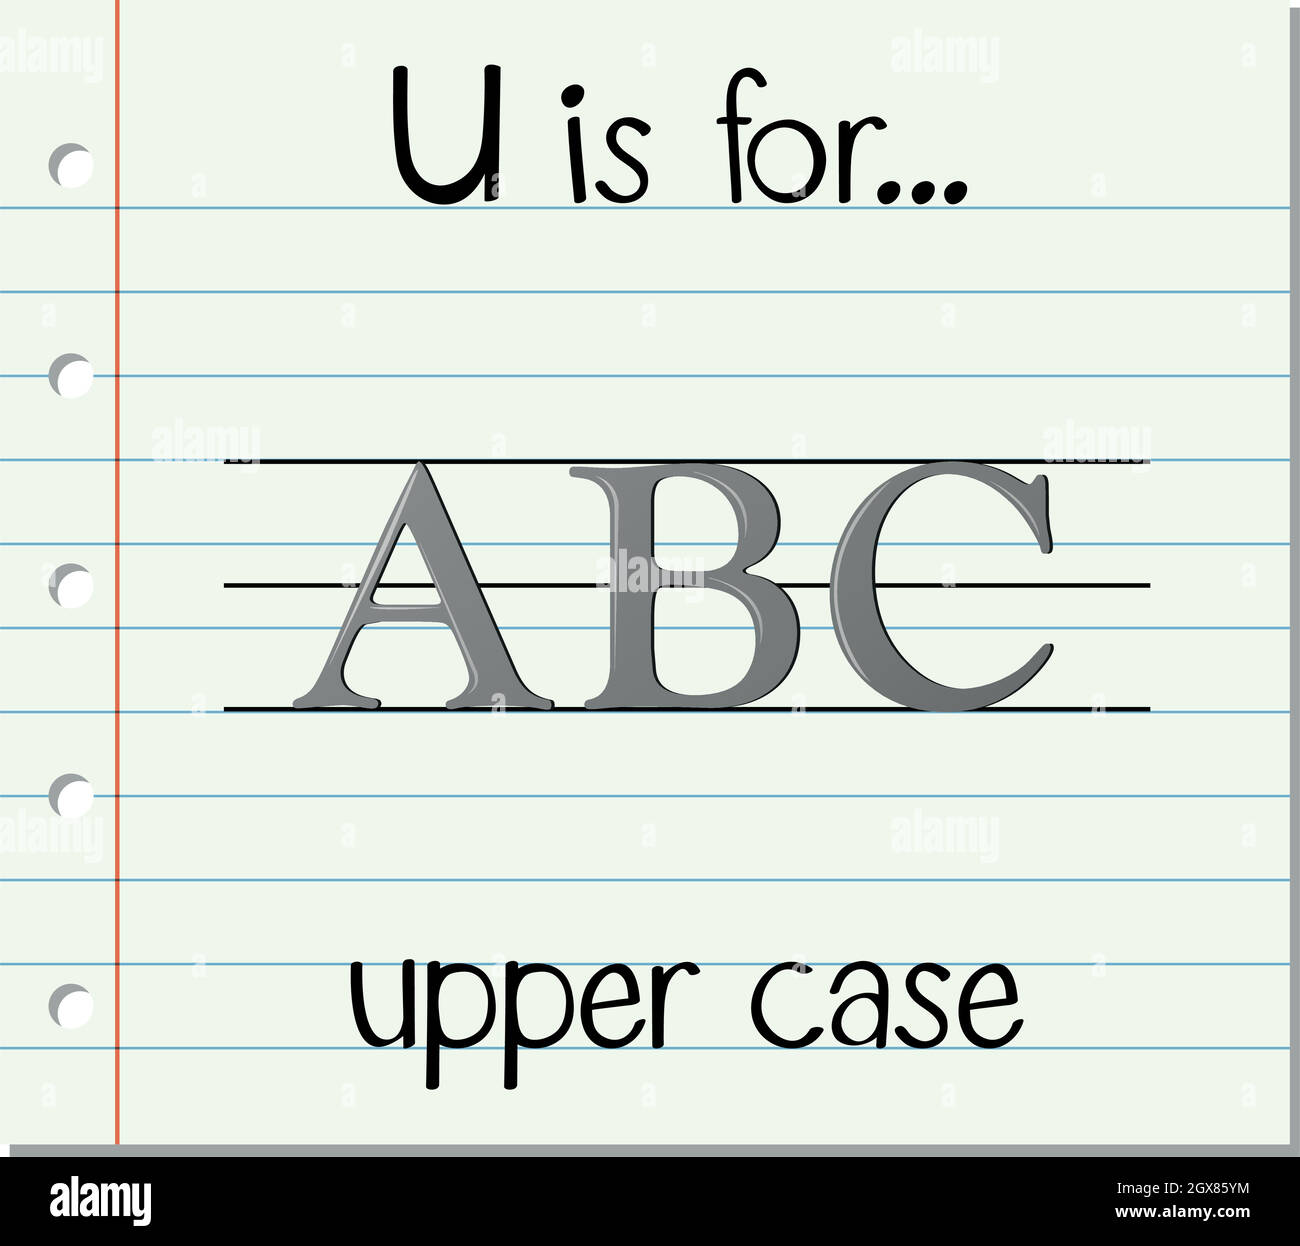 Flashcard letter U is for upper case Stock Vector